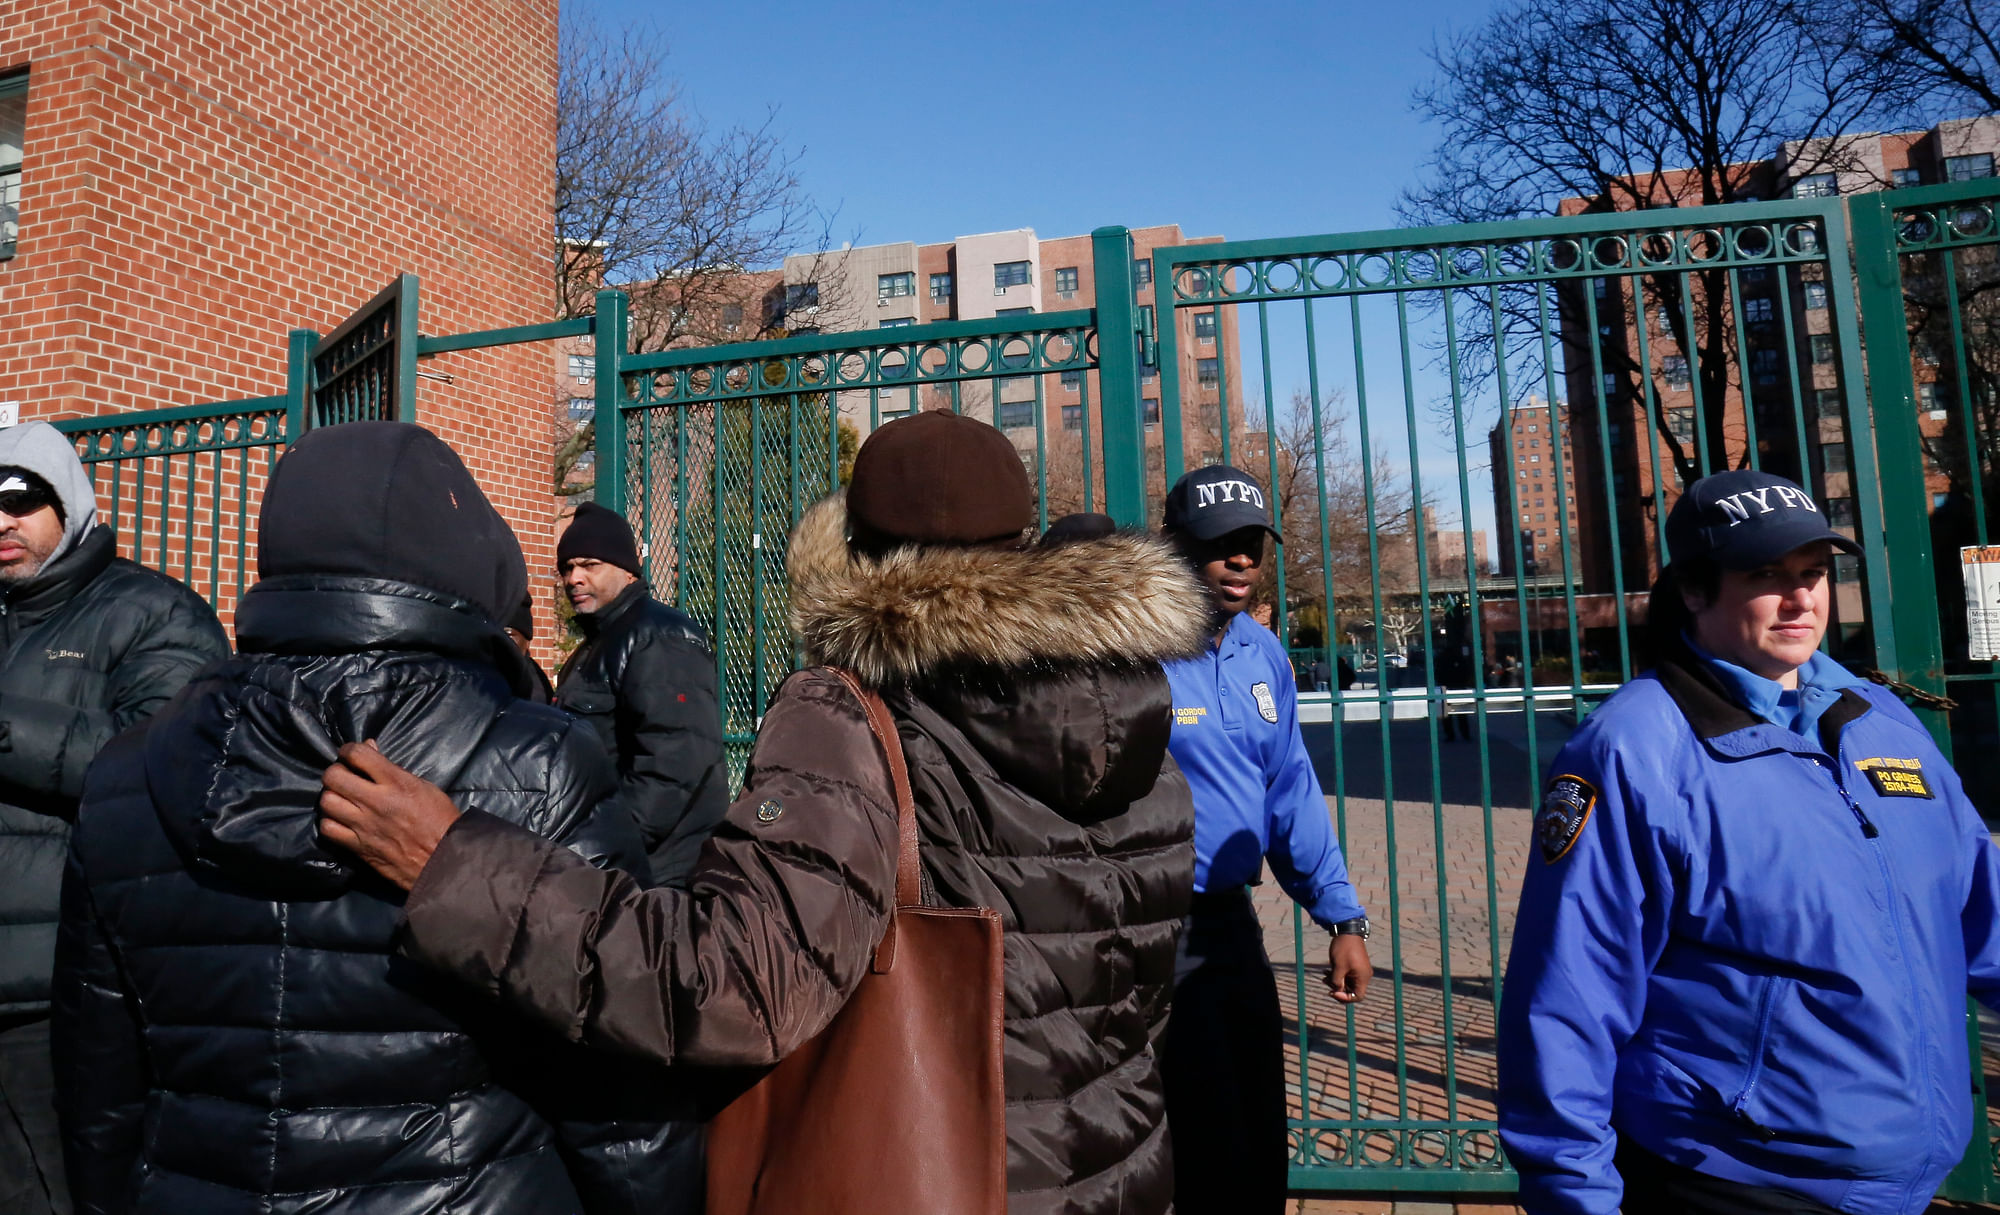 Neighbors gather outside the apartment in New York, where four people, including a young child, were found shot to death on 14 March.